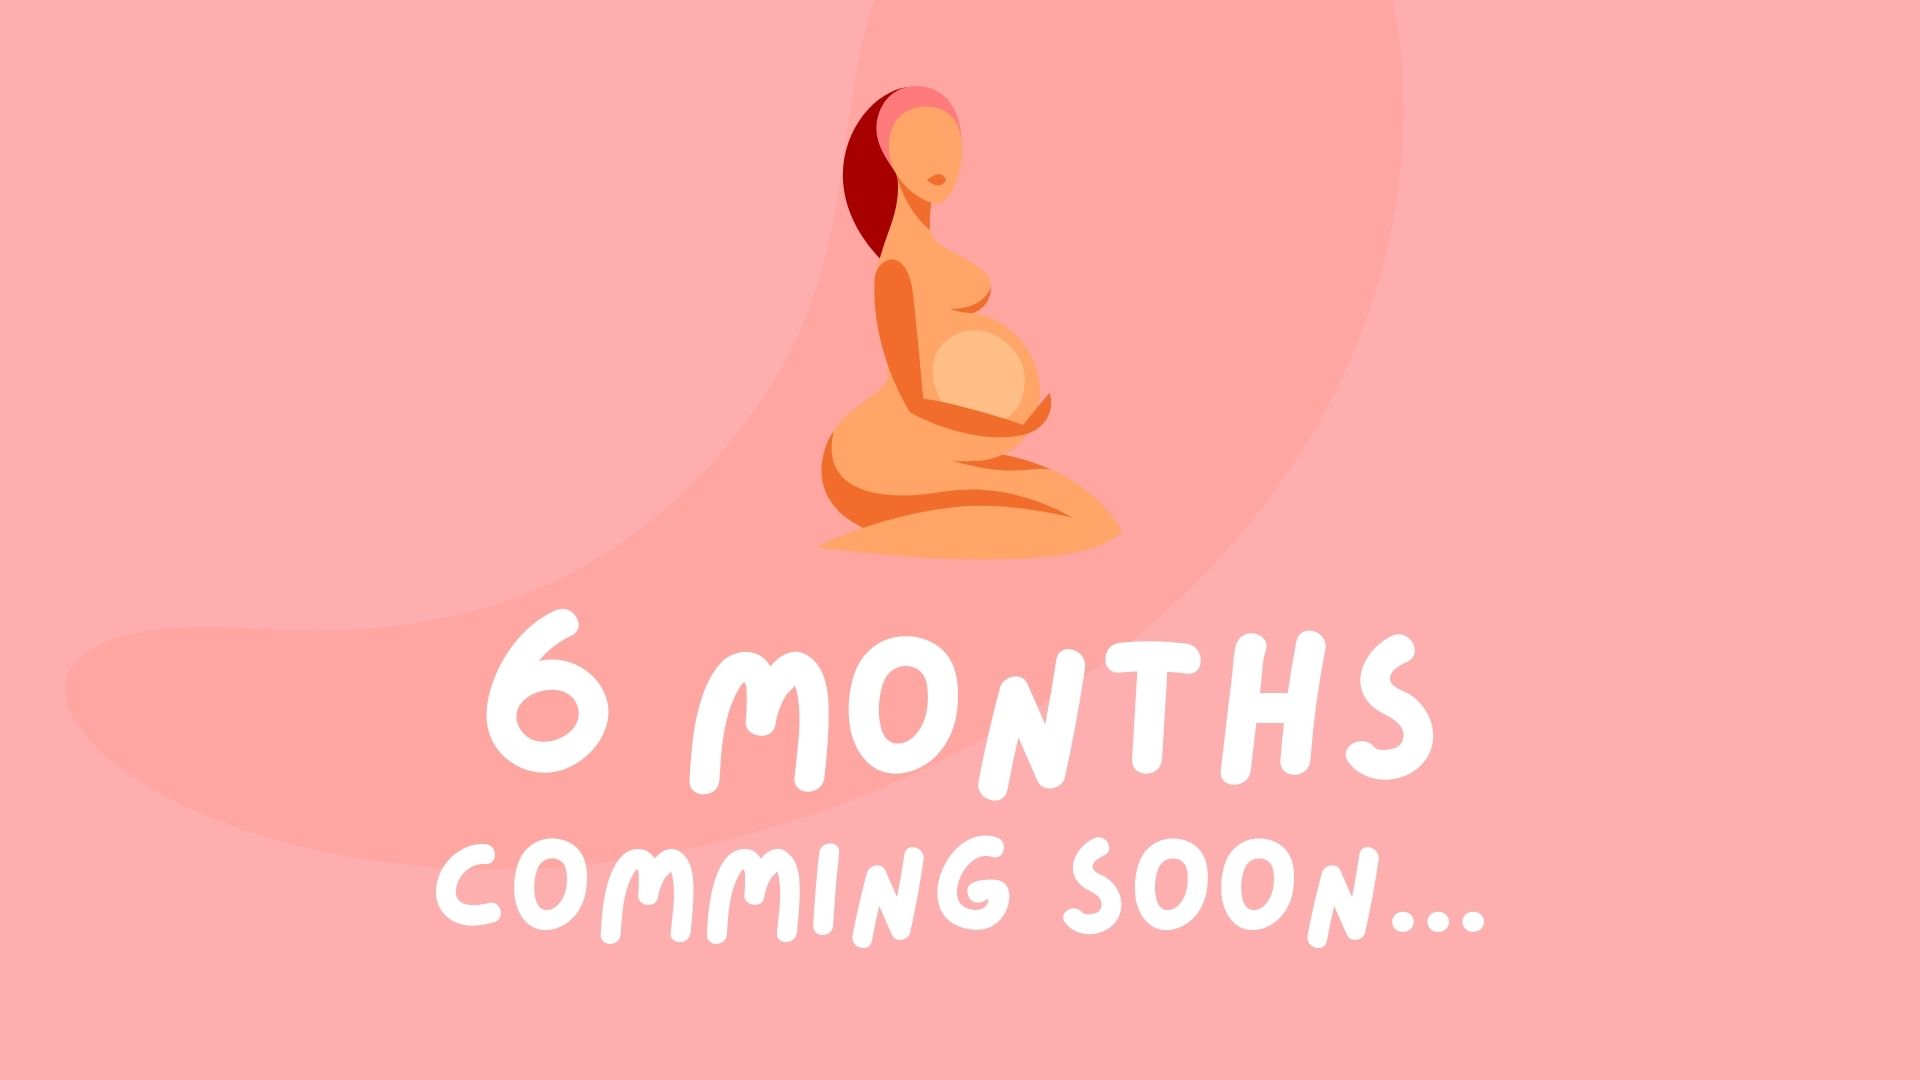 image of a 6 month old baby coming soon announcement